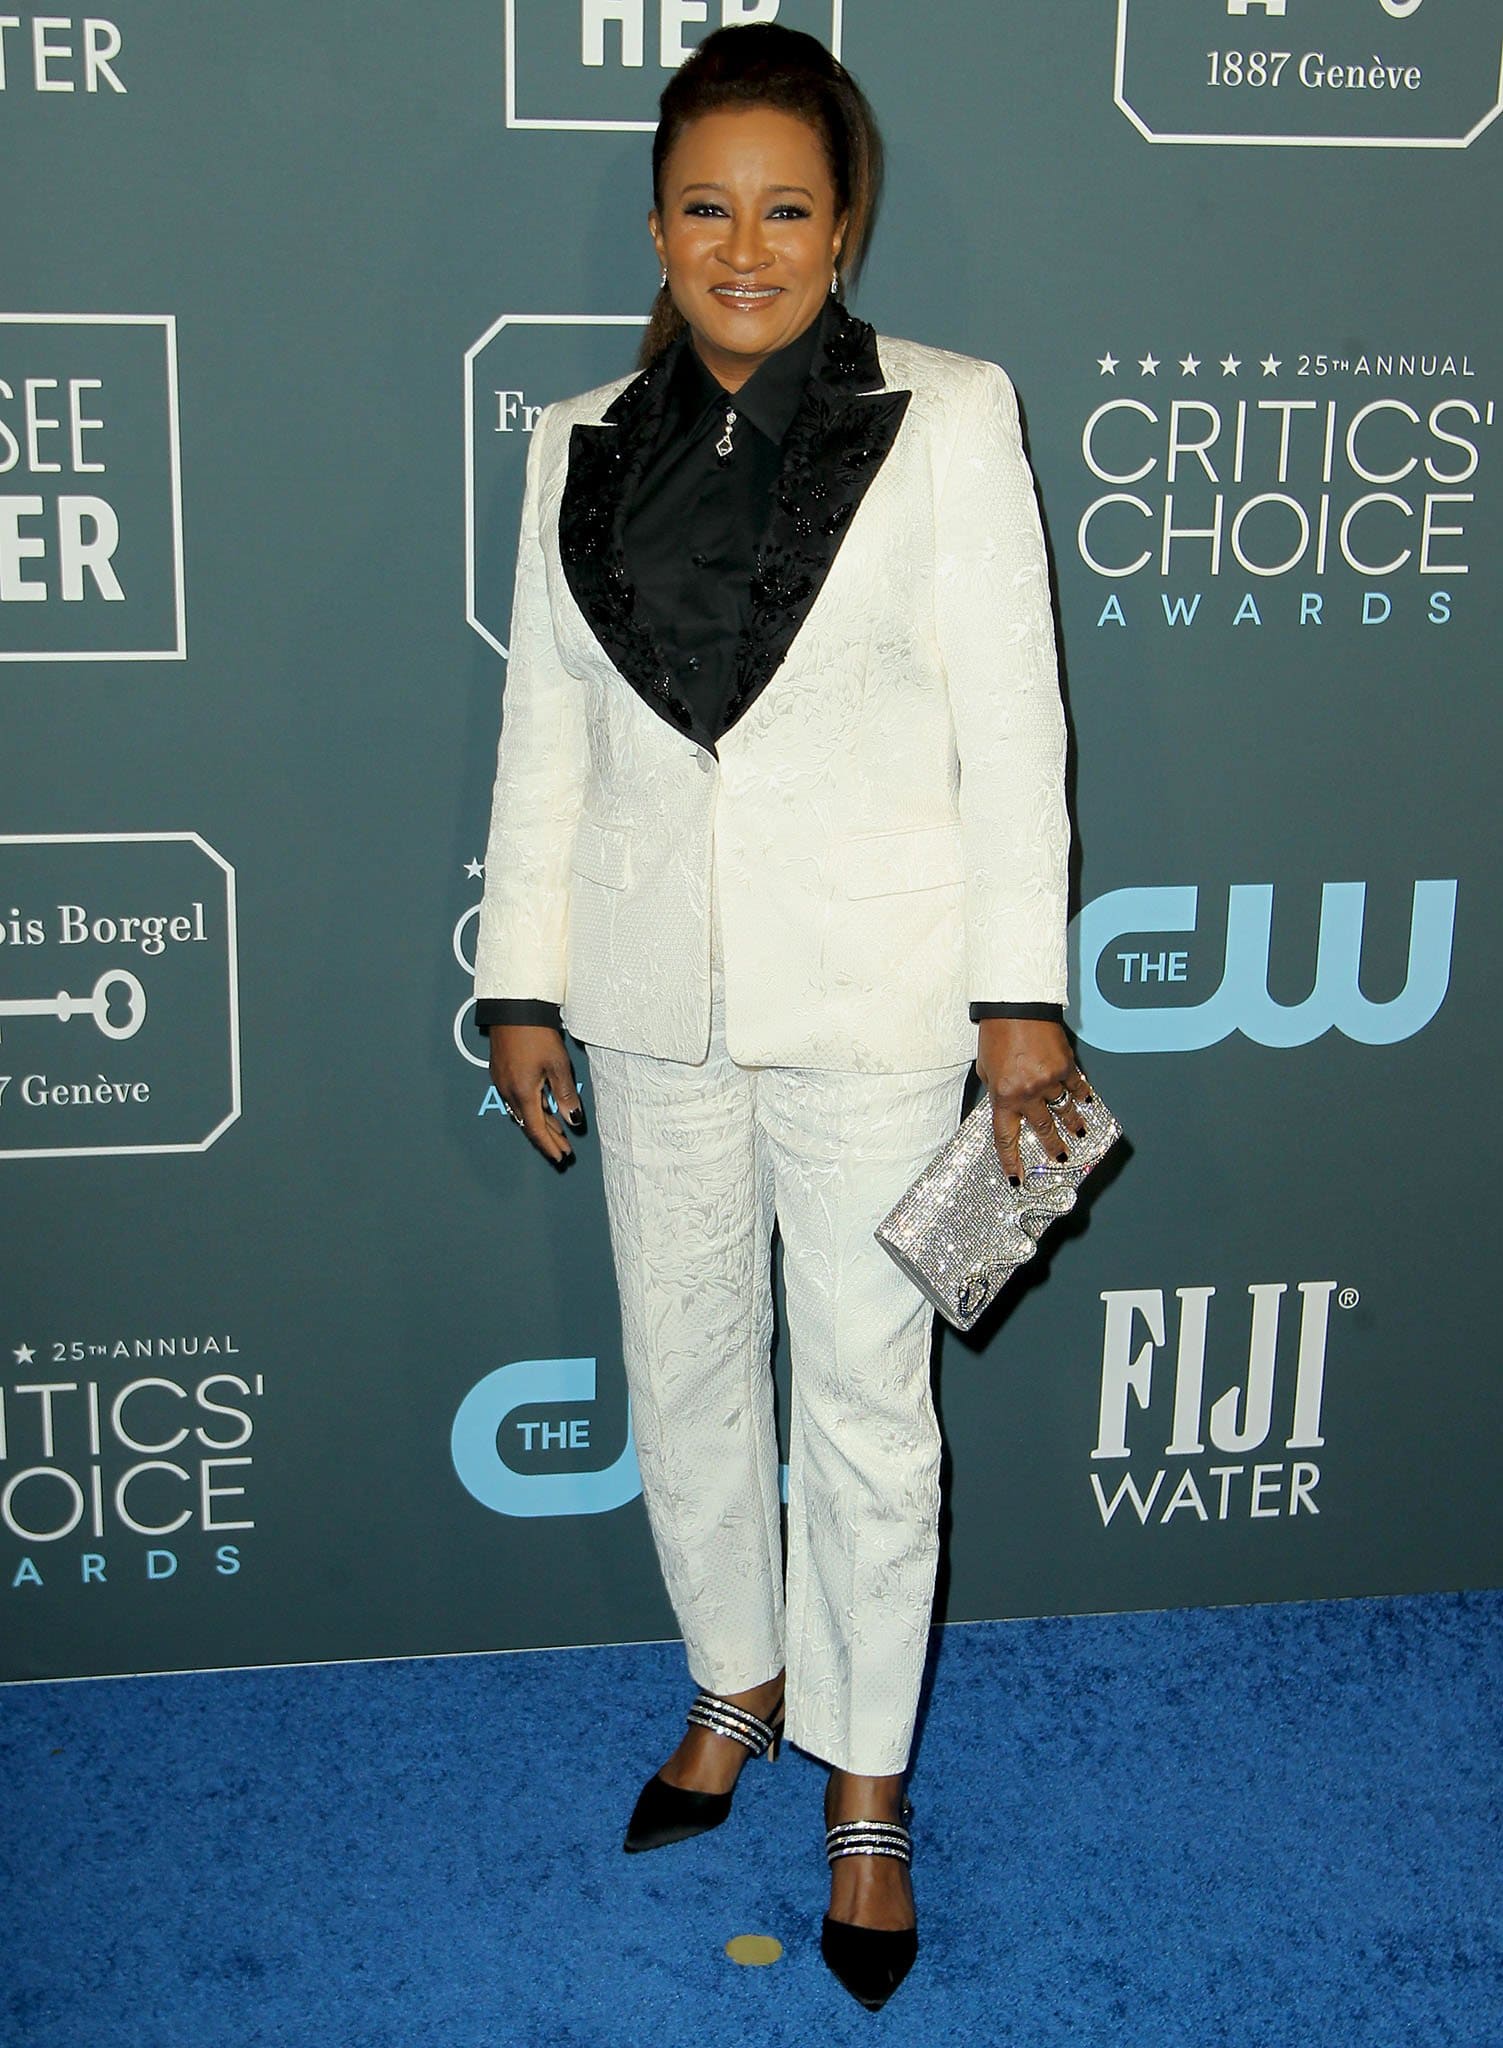 Wanda Sykes worked for the National Security Agency before becoming a stand-up comedienne